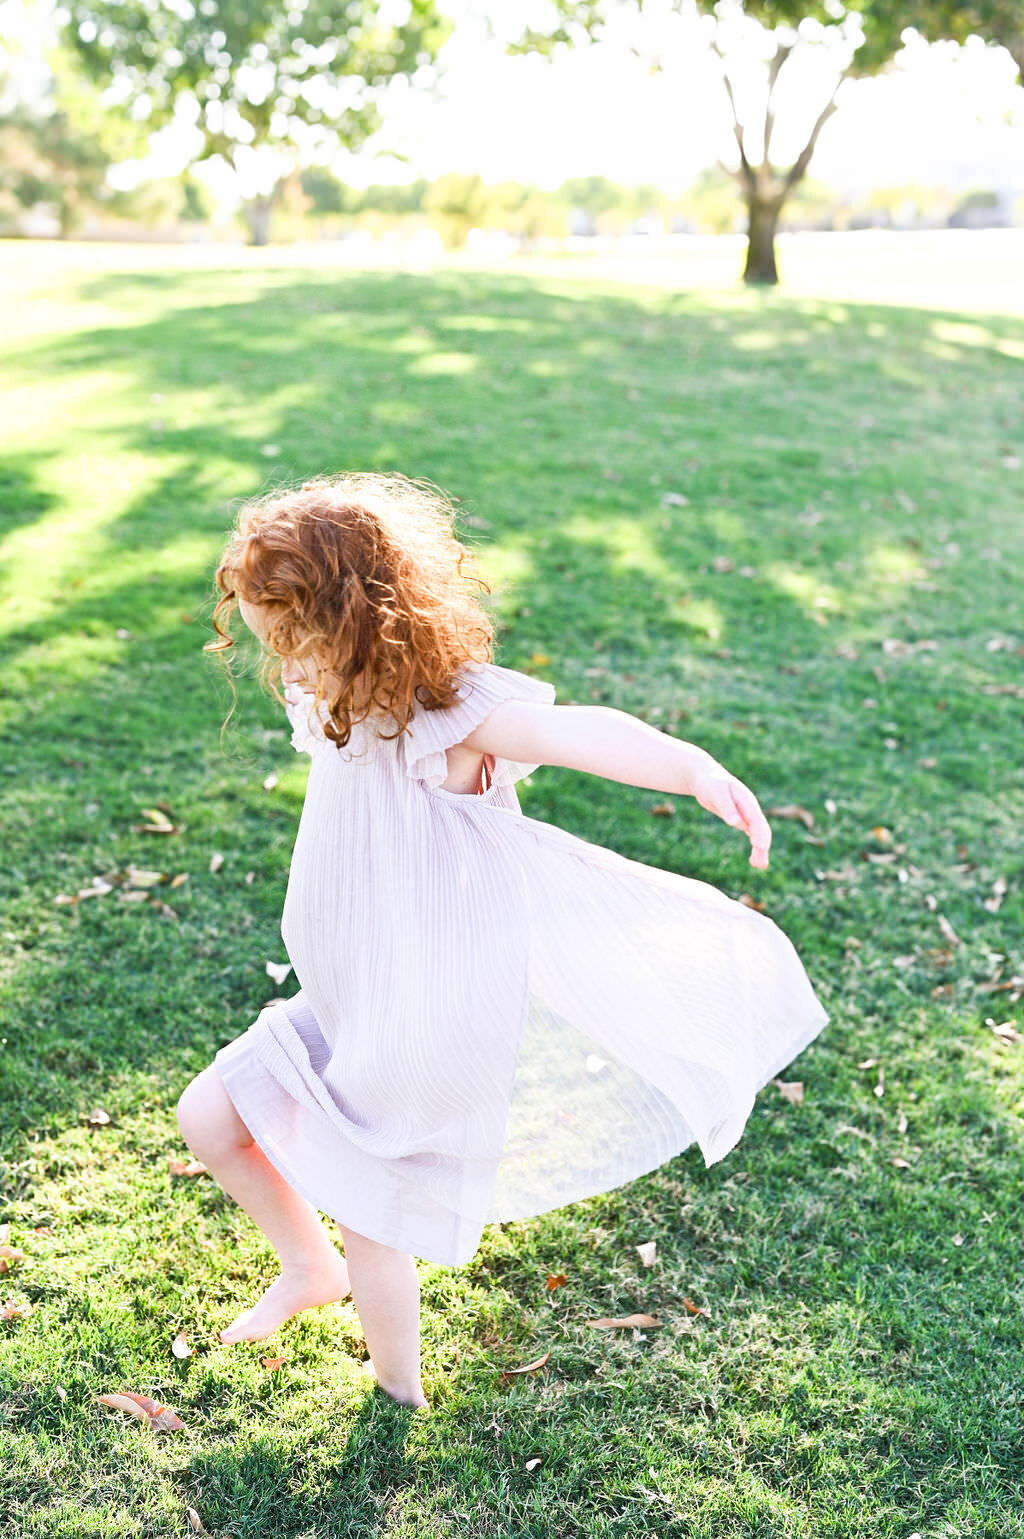 A small girl in a dress dancing in a field.